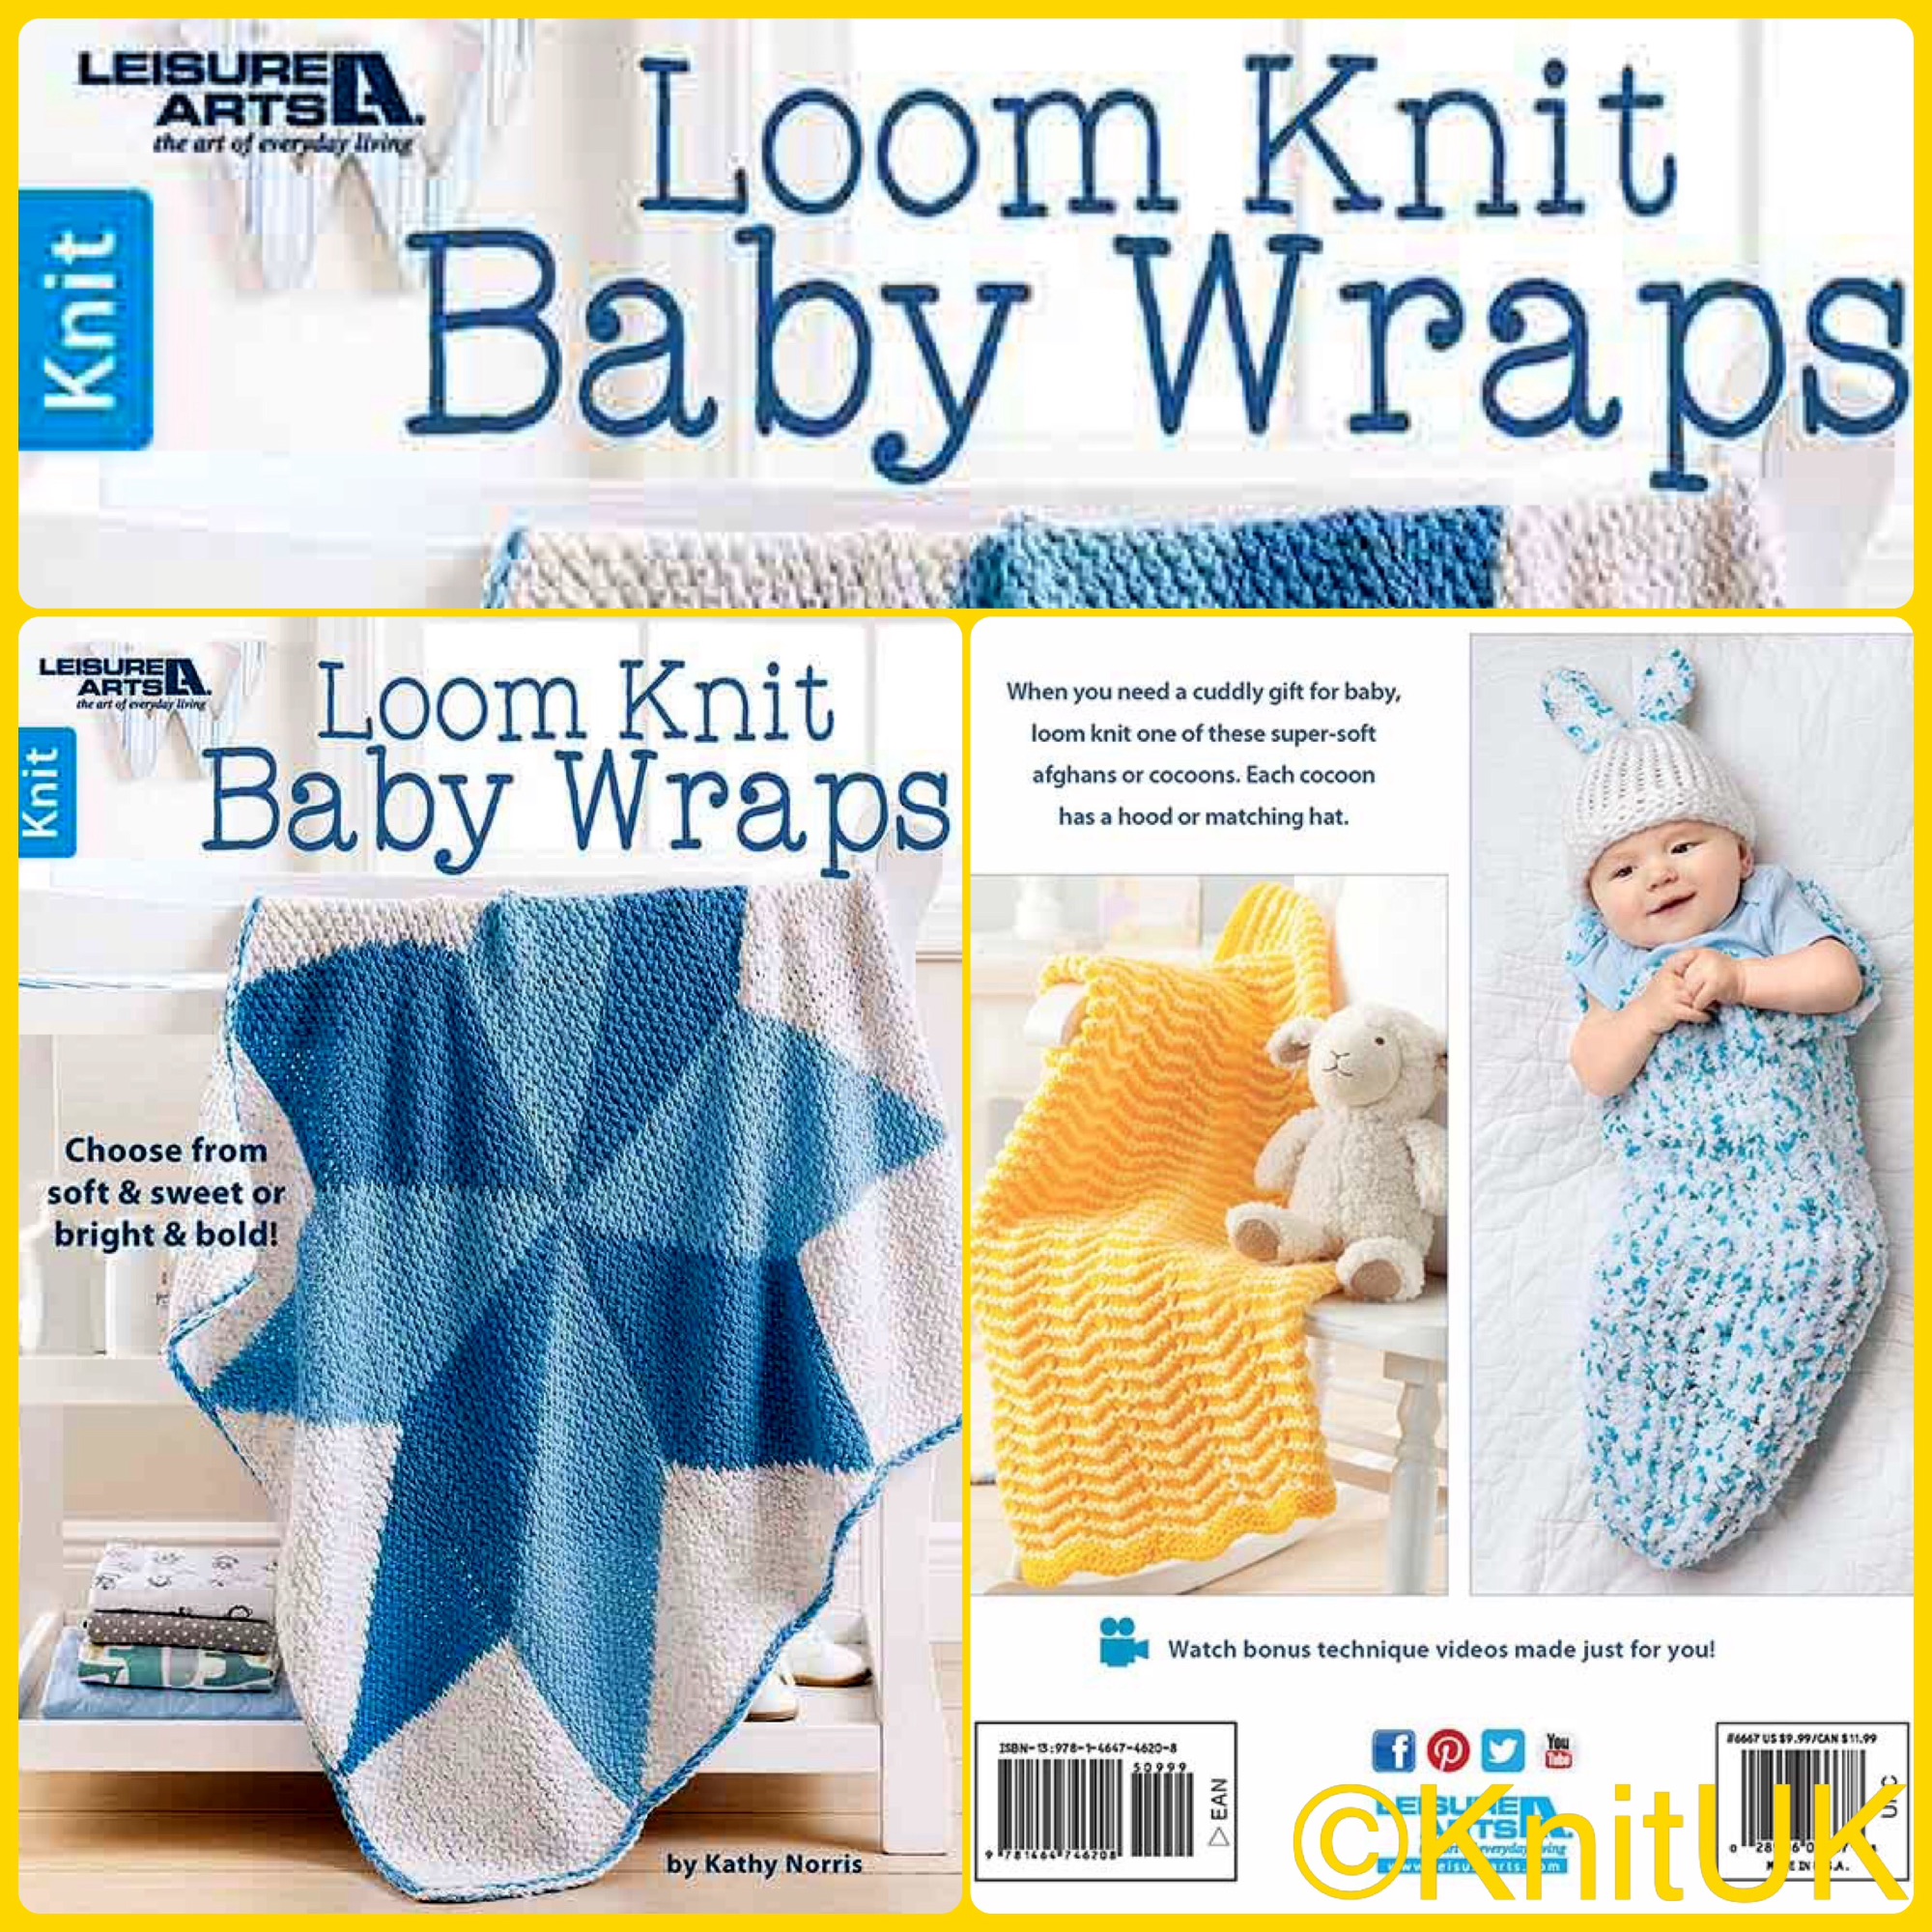 Leisure arts loom knit baby wraps book